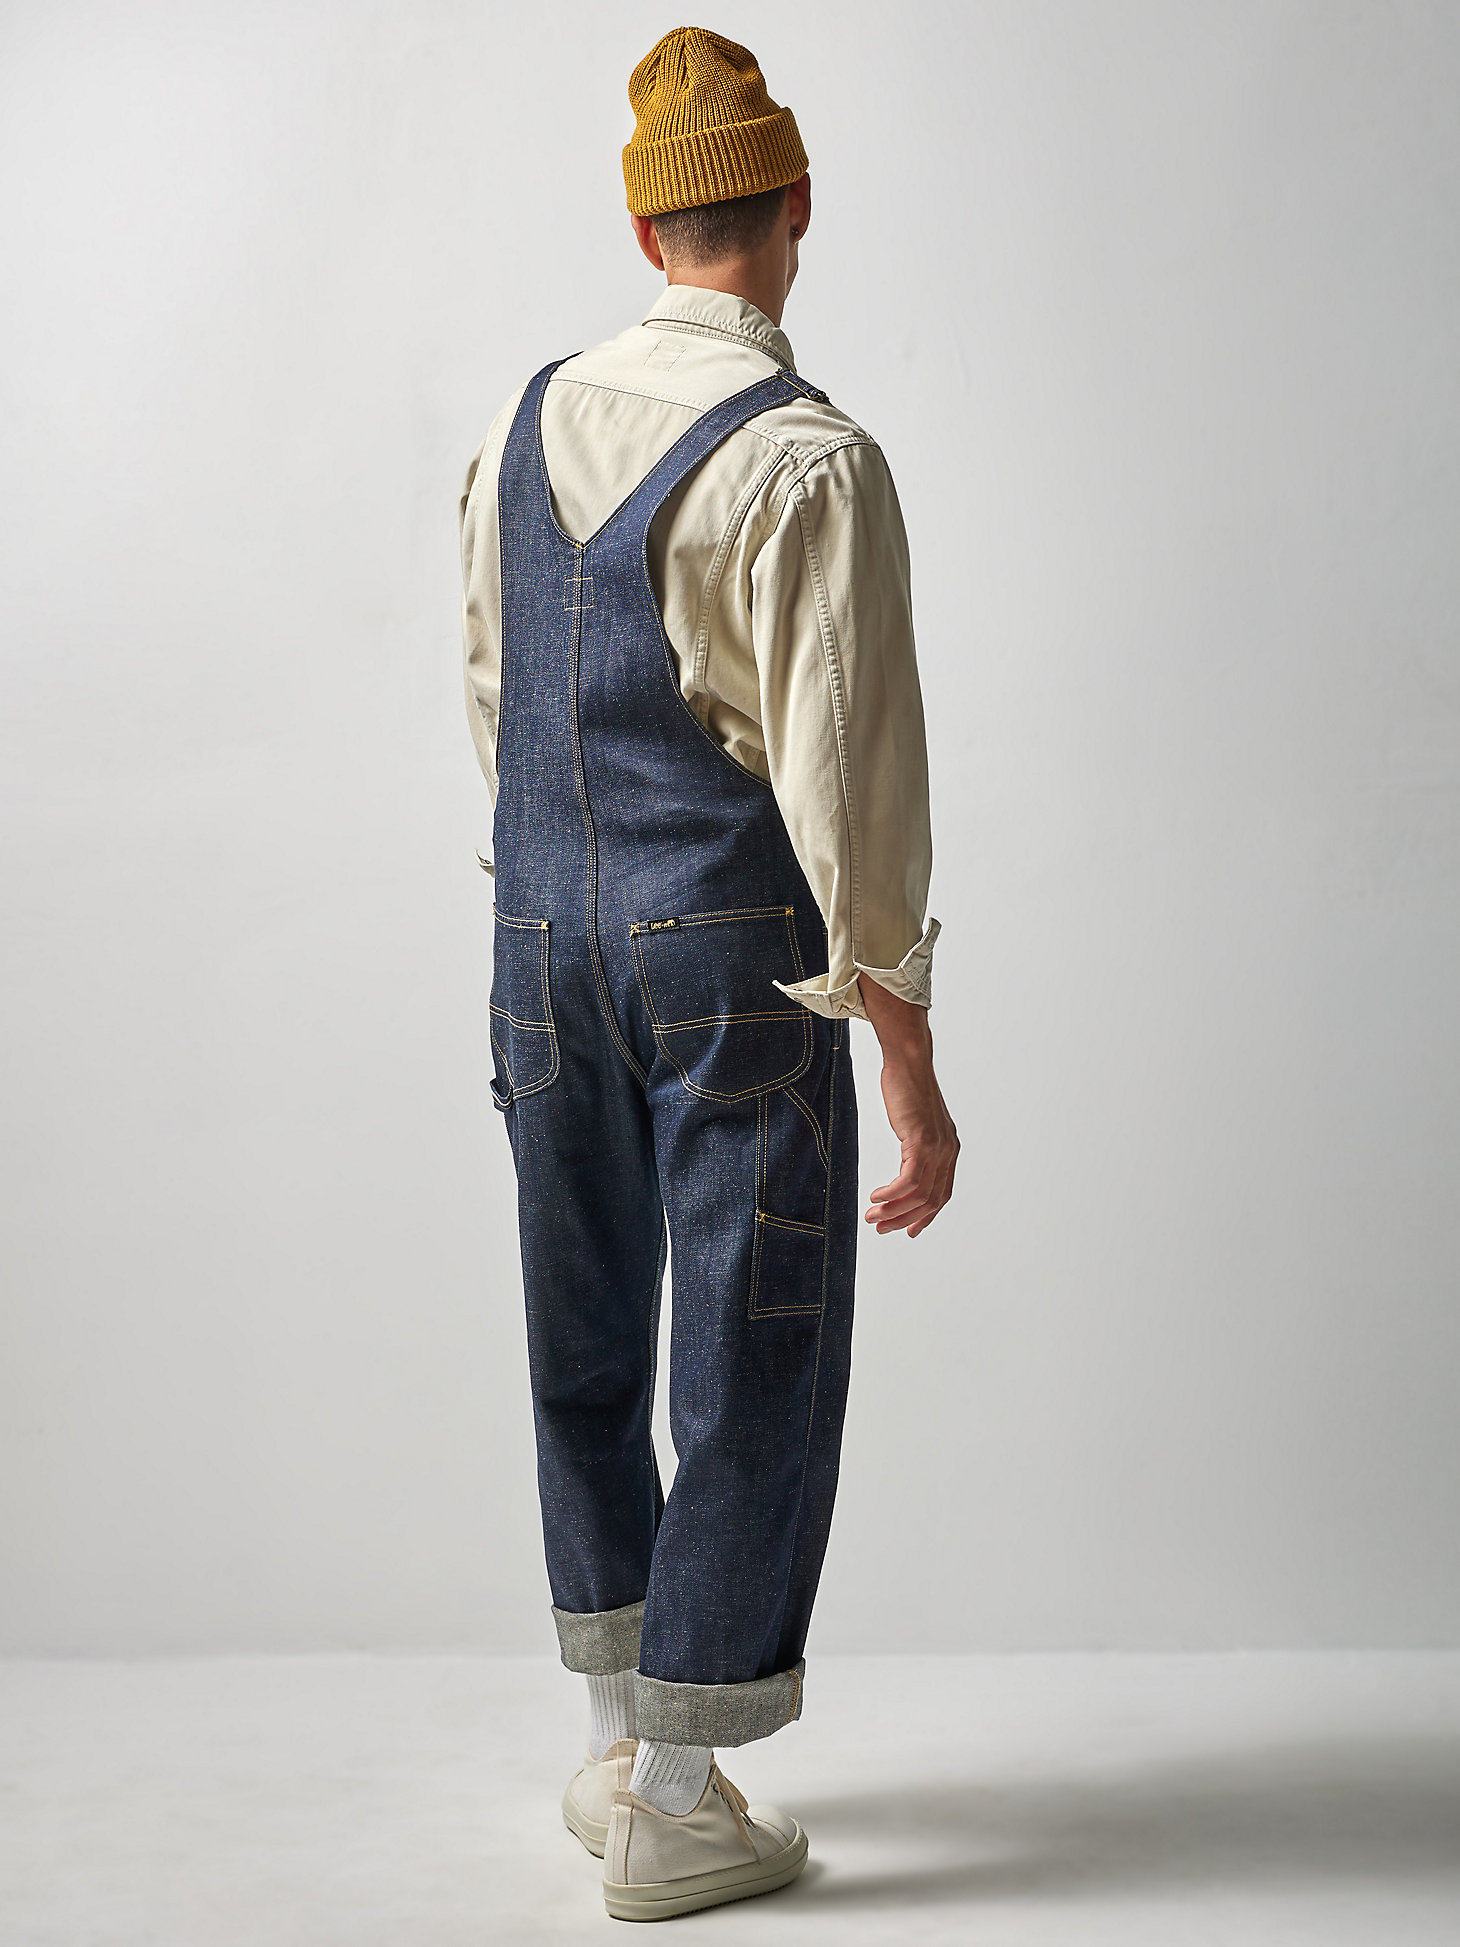 Men's Lee® x The Brooklyn Circus® Whizit Zip Overall in Indigo Selvedge alternative view 2